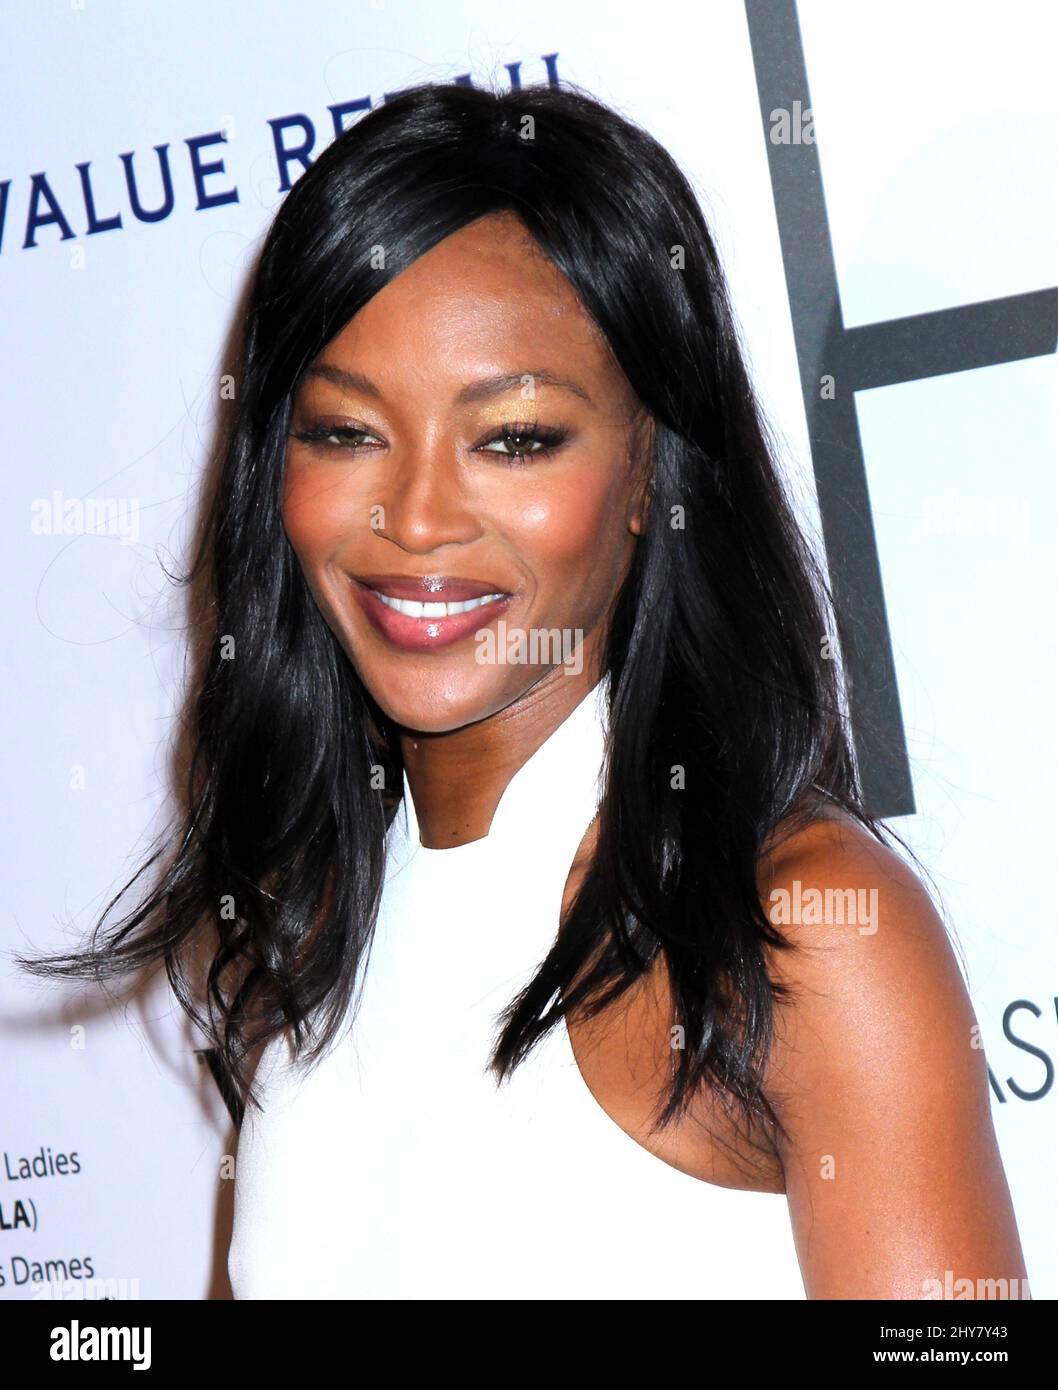 Naomi Campbell attending Fashion 4 Development's 5th Annual Official First Ladies Luncheon held at The Pierre Hotel in New York, USA. Stock Photo